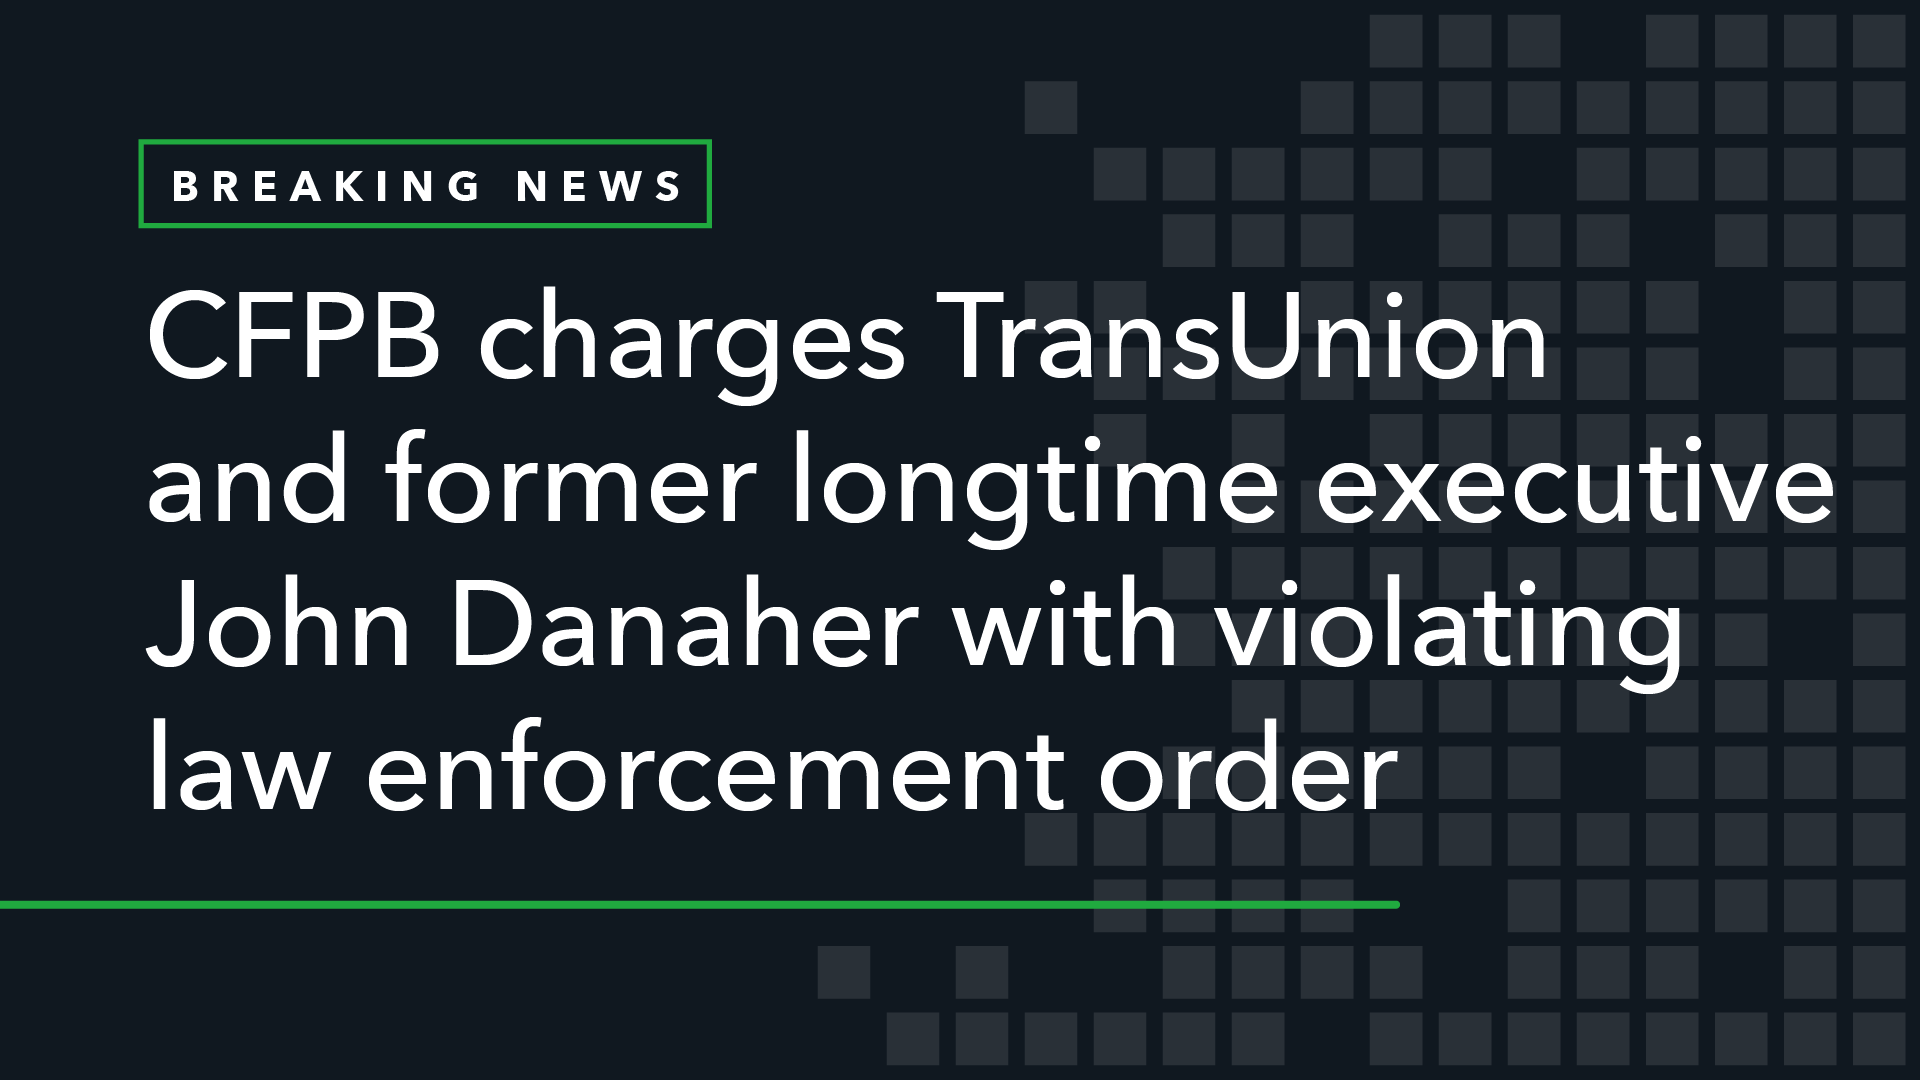 CFPB Charges TransUnion and Senior Executive John Danaher with Violating Law Enforcement Order